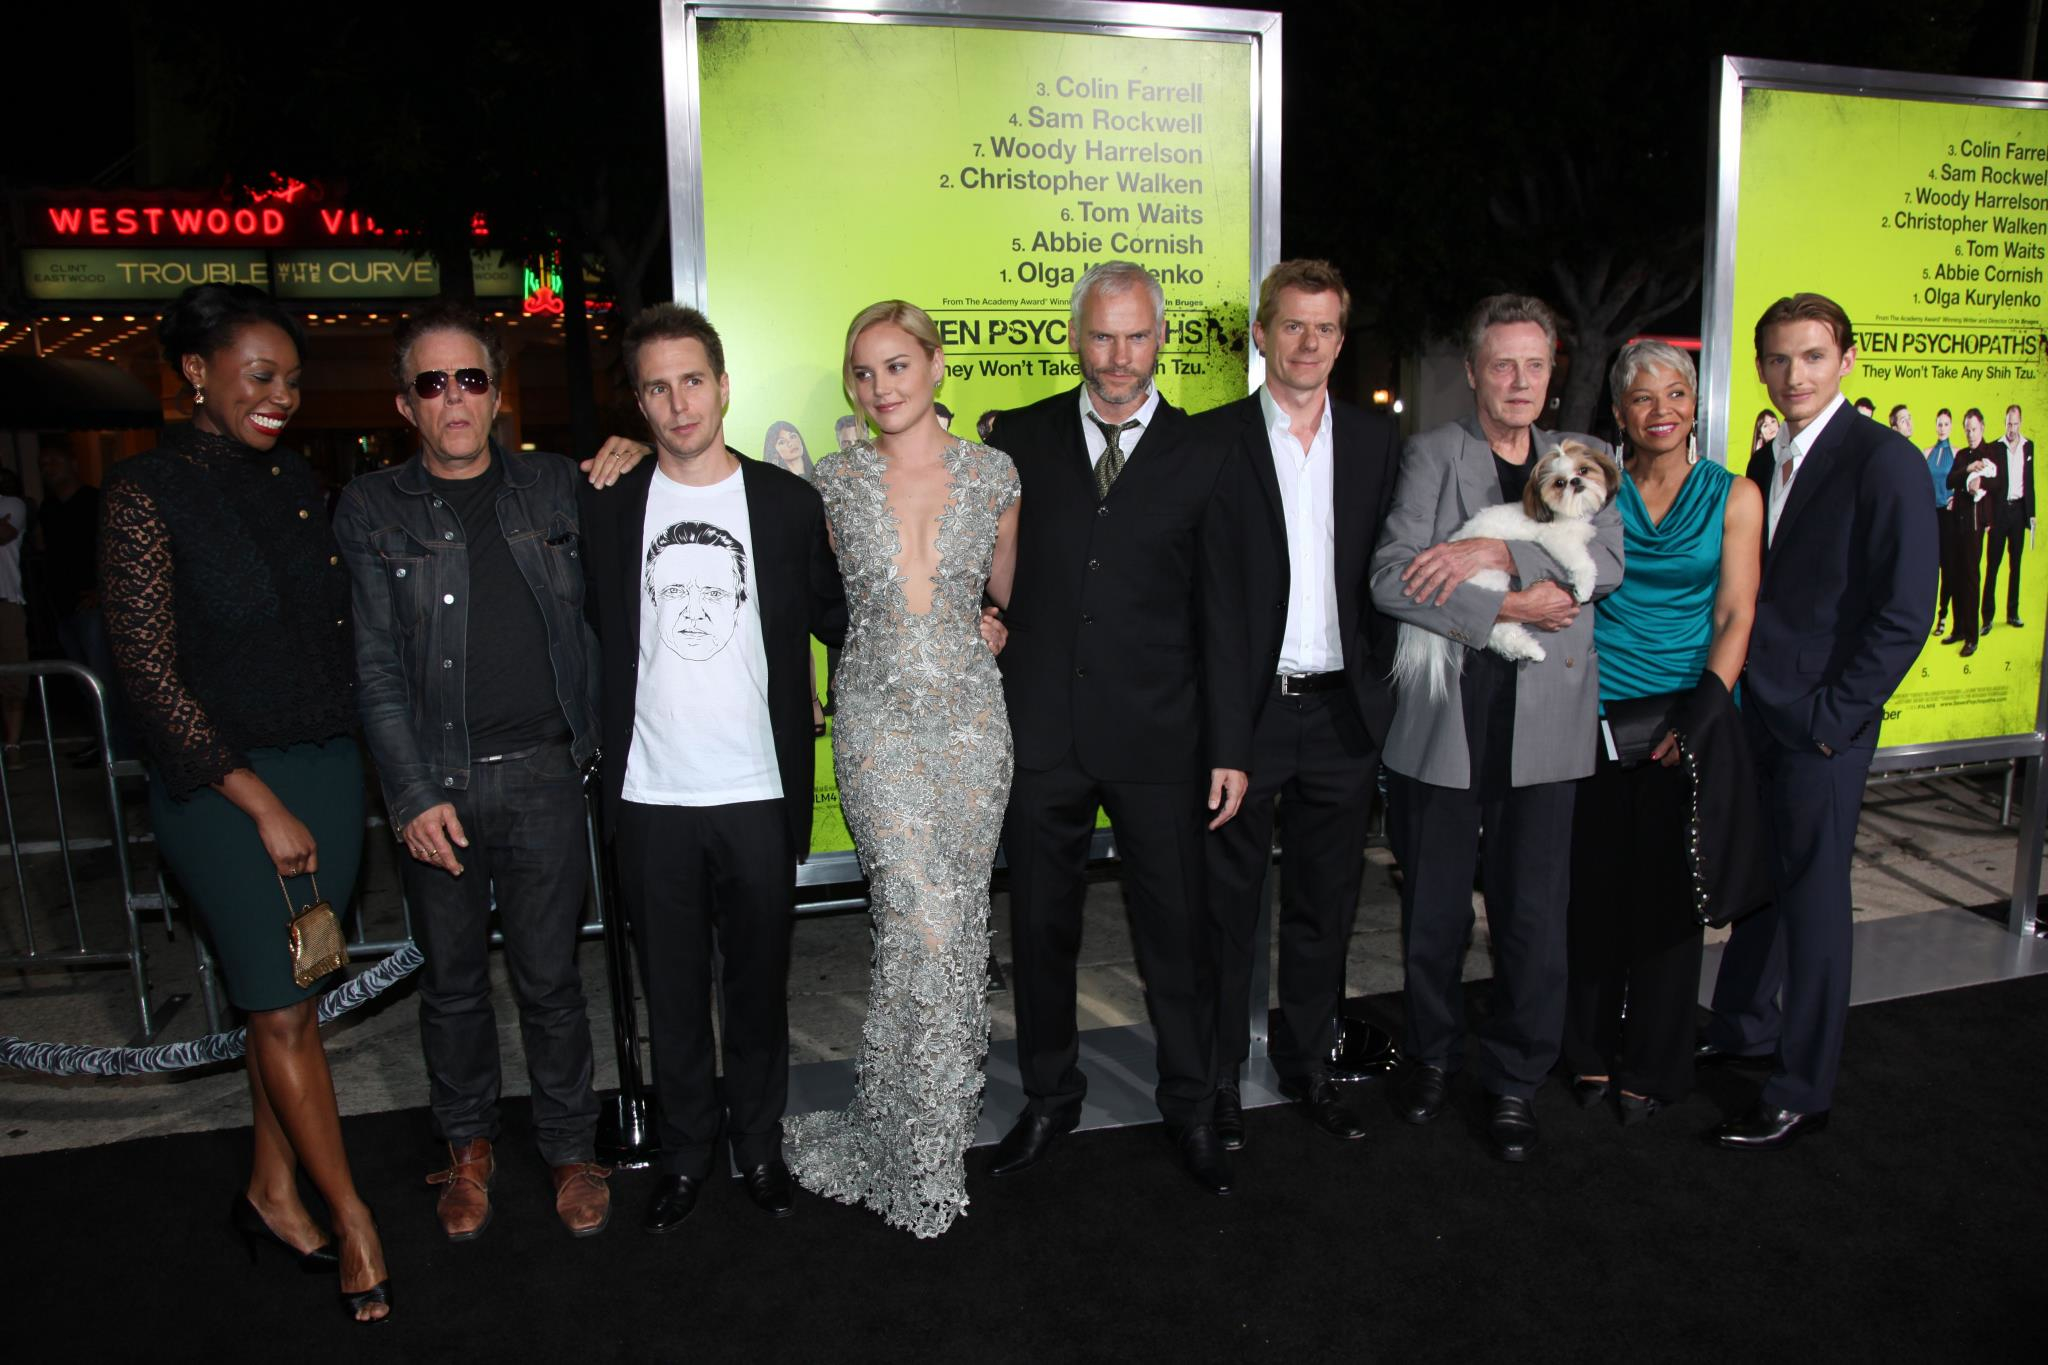 James Landry Hebert poses for a photo with Christopher Walken, Sam Rockwell, Tom Waits & the rest of the cast of Seven Psychopaths at the LA premiere